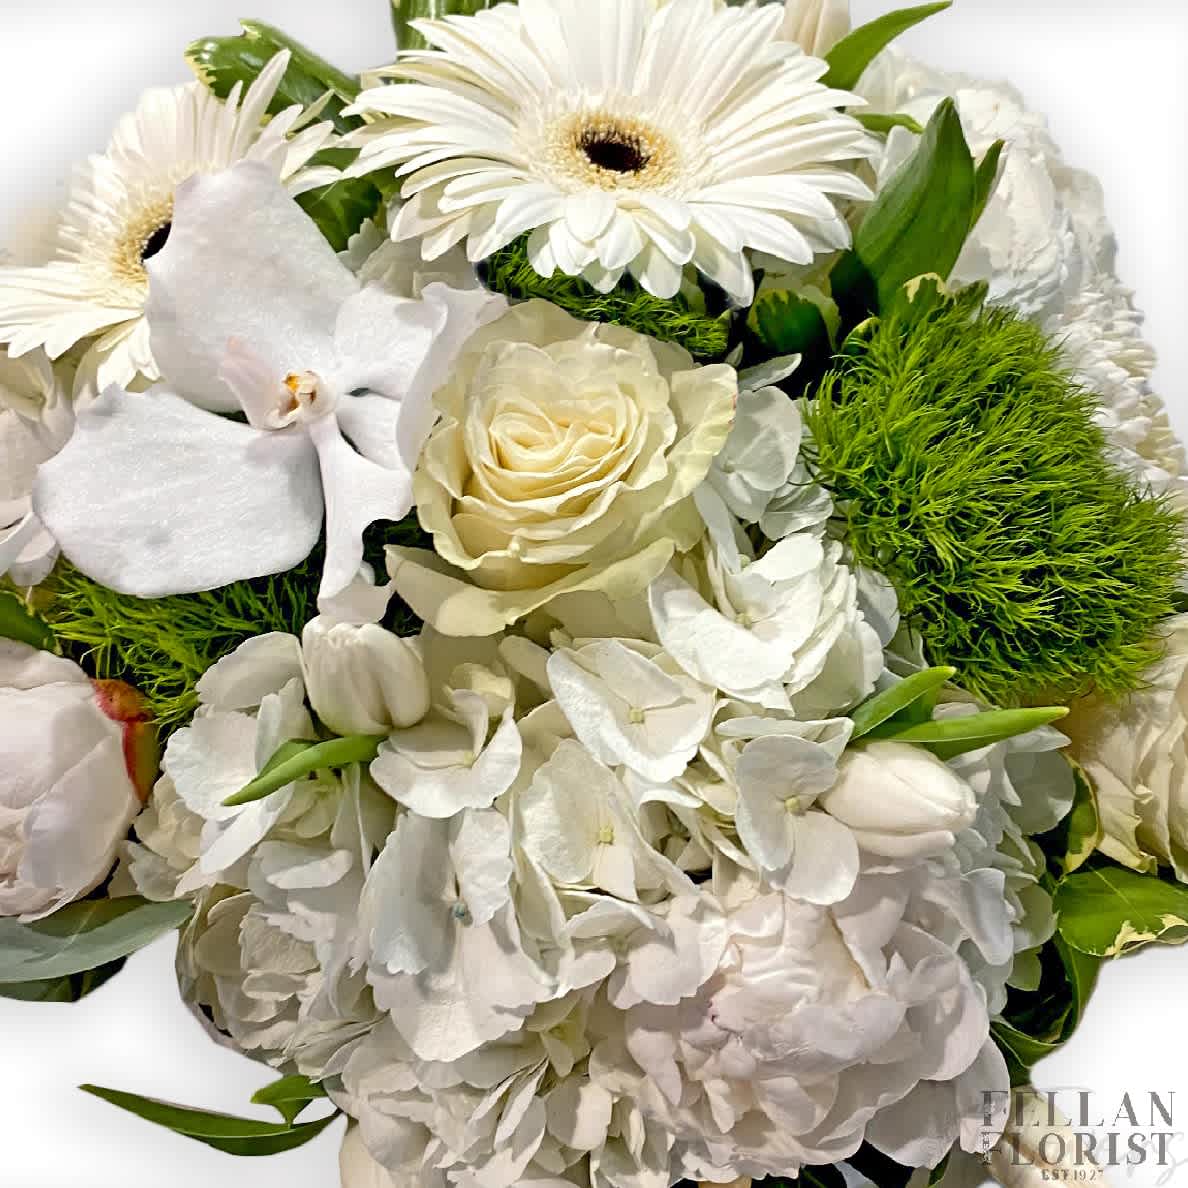 Whites and Greens Arrangement - A Mix of Hydrangeas, Orchids and Daisies. Paired with luscious greens